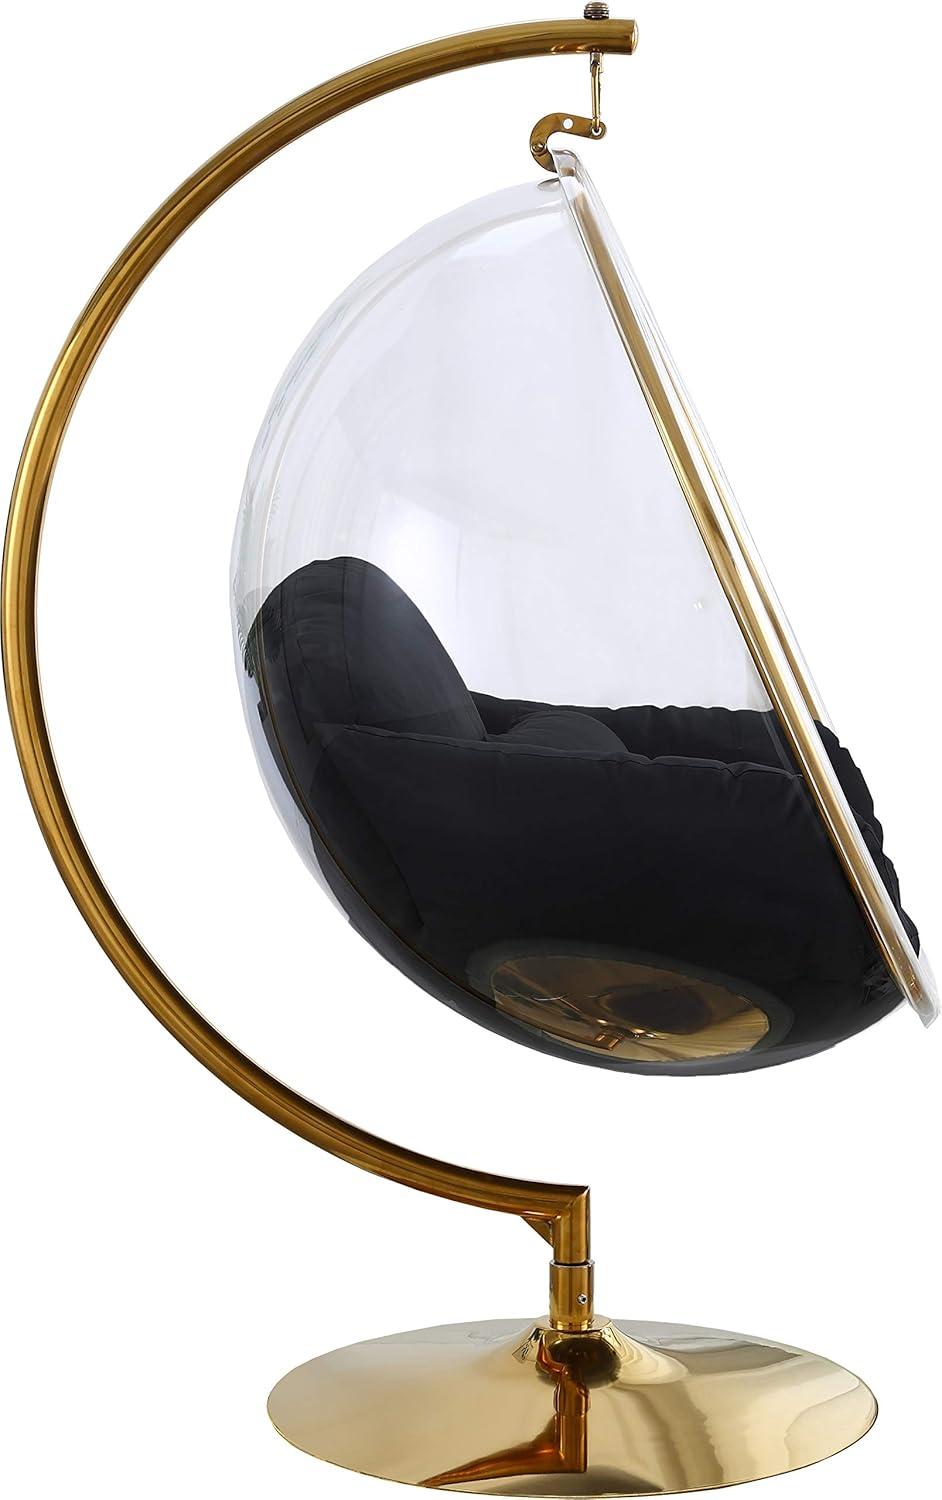 Luna Black and Gold Acrylic Swing Bubble Accent Chair, 41.5" W